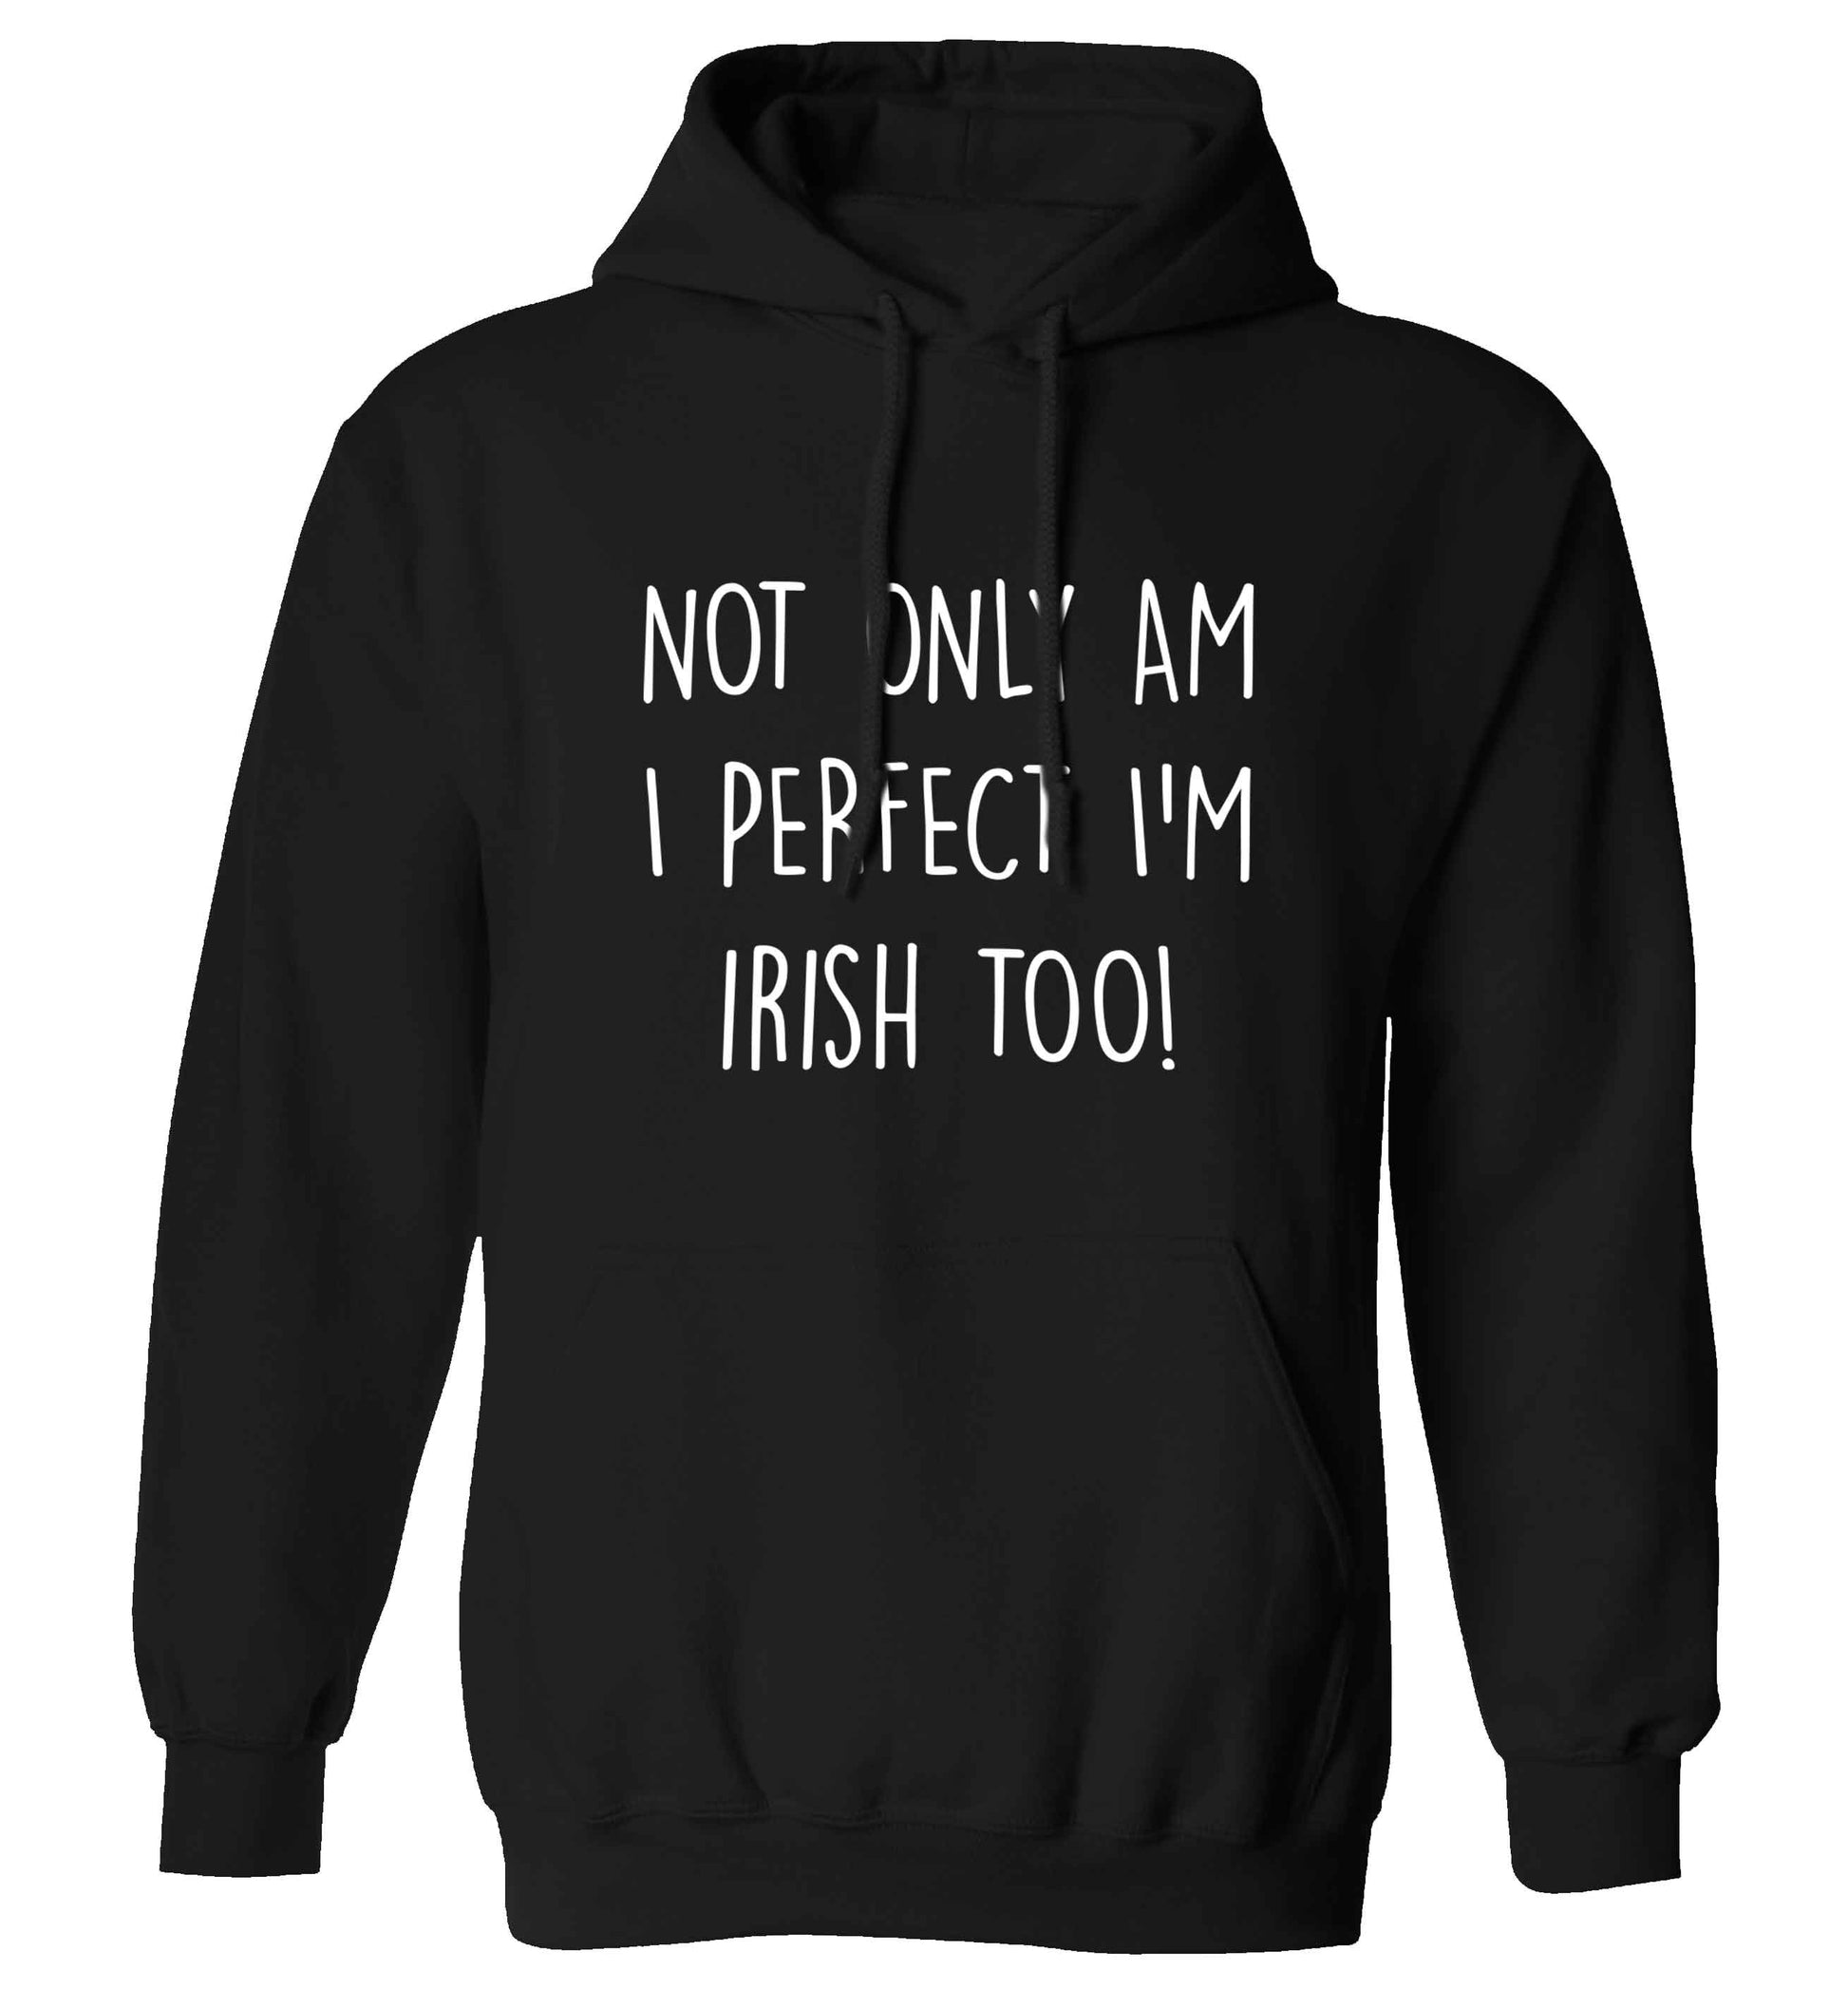 Not only am I perfect I'm Irish too! adults unisex black hoodie 2XL